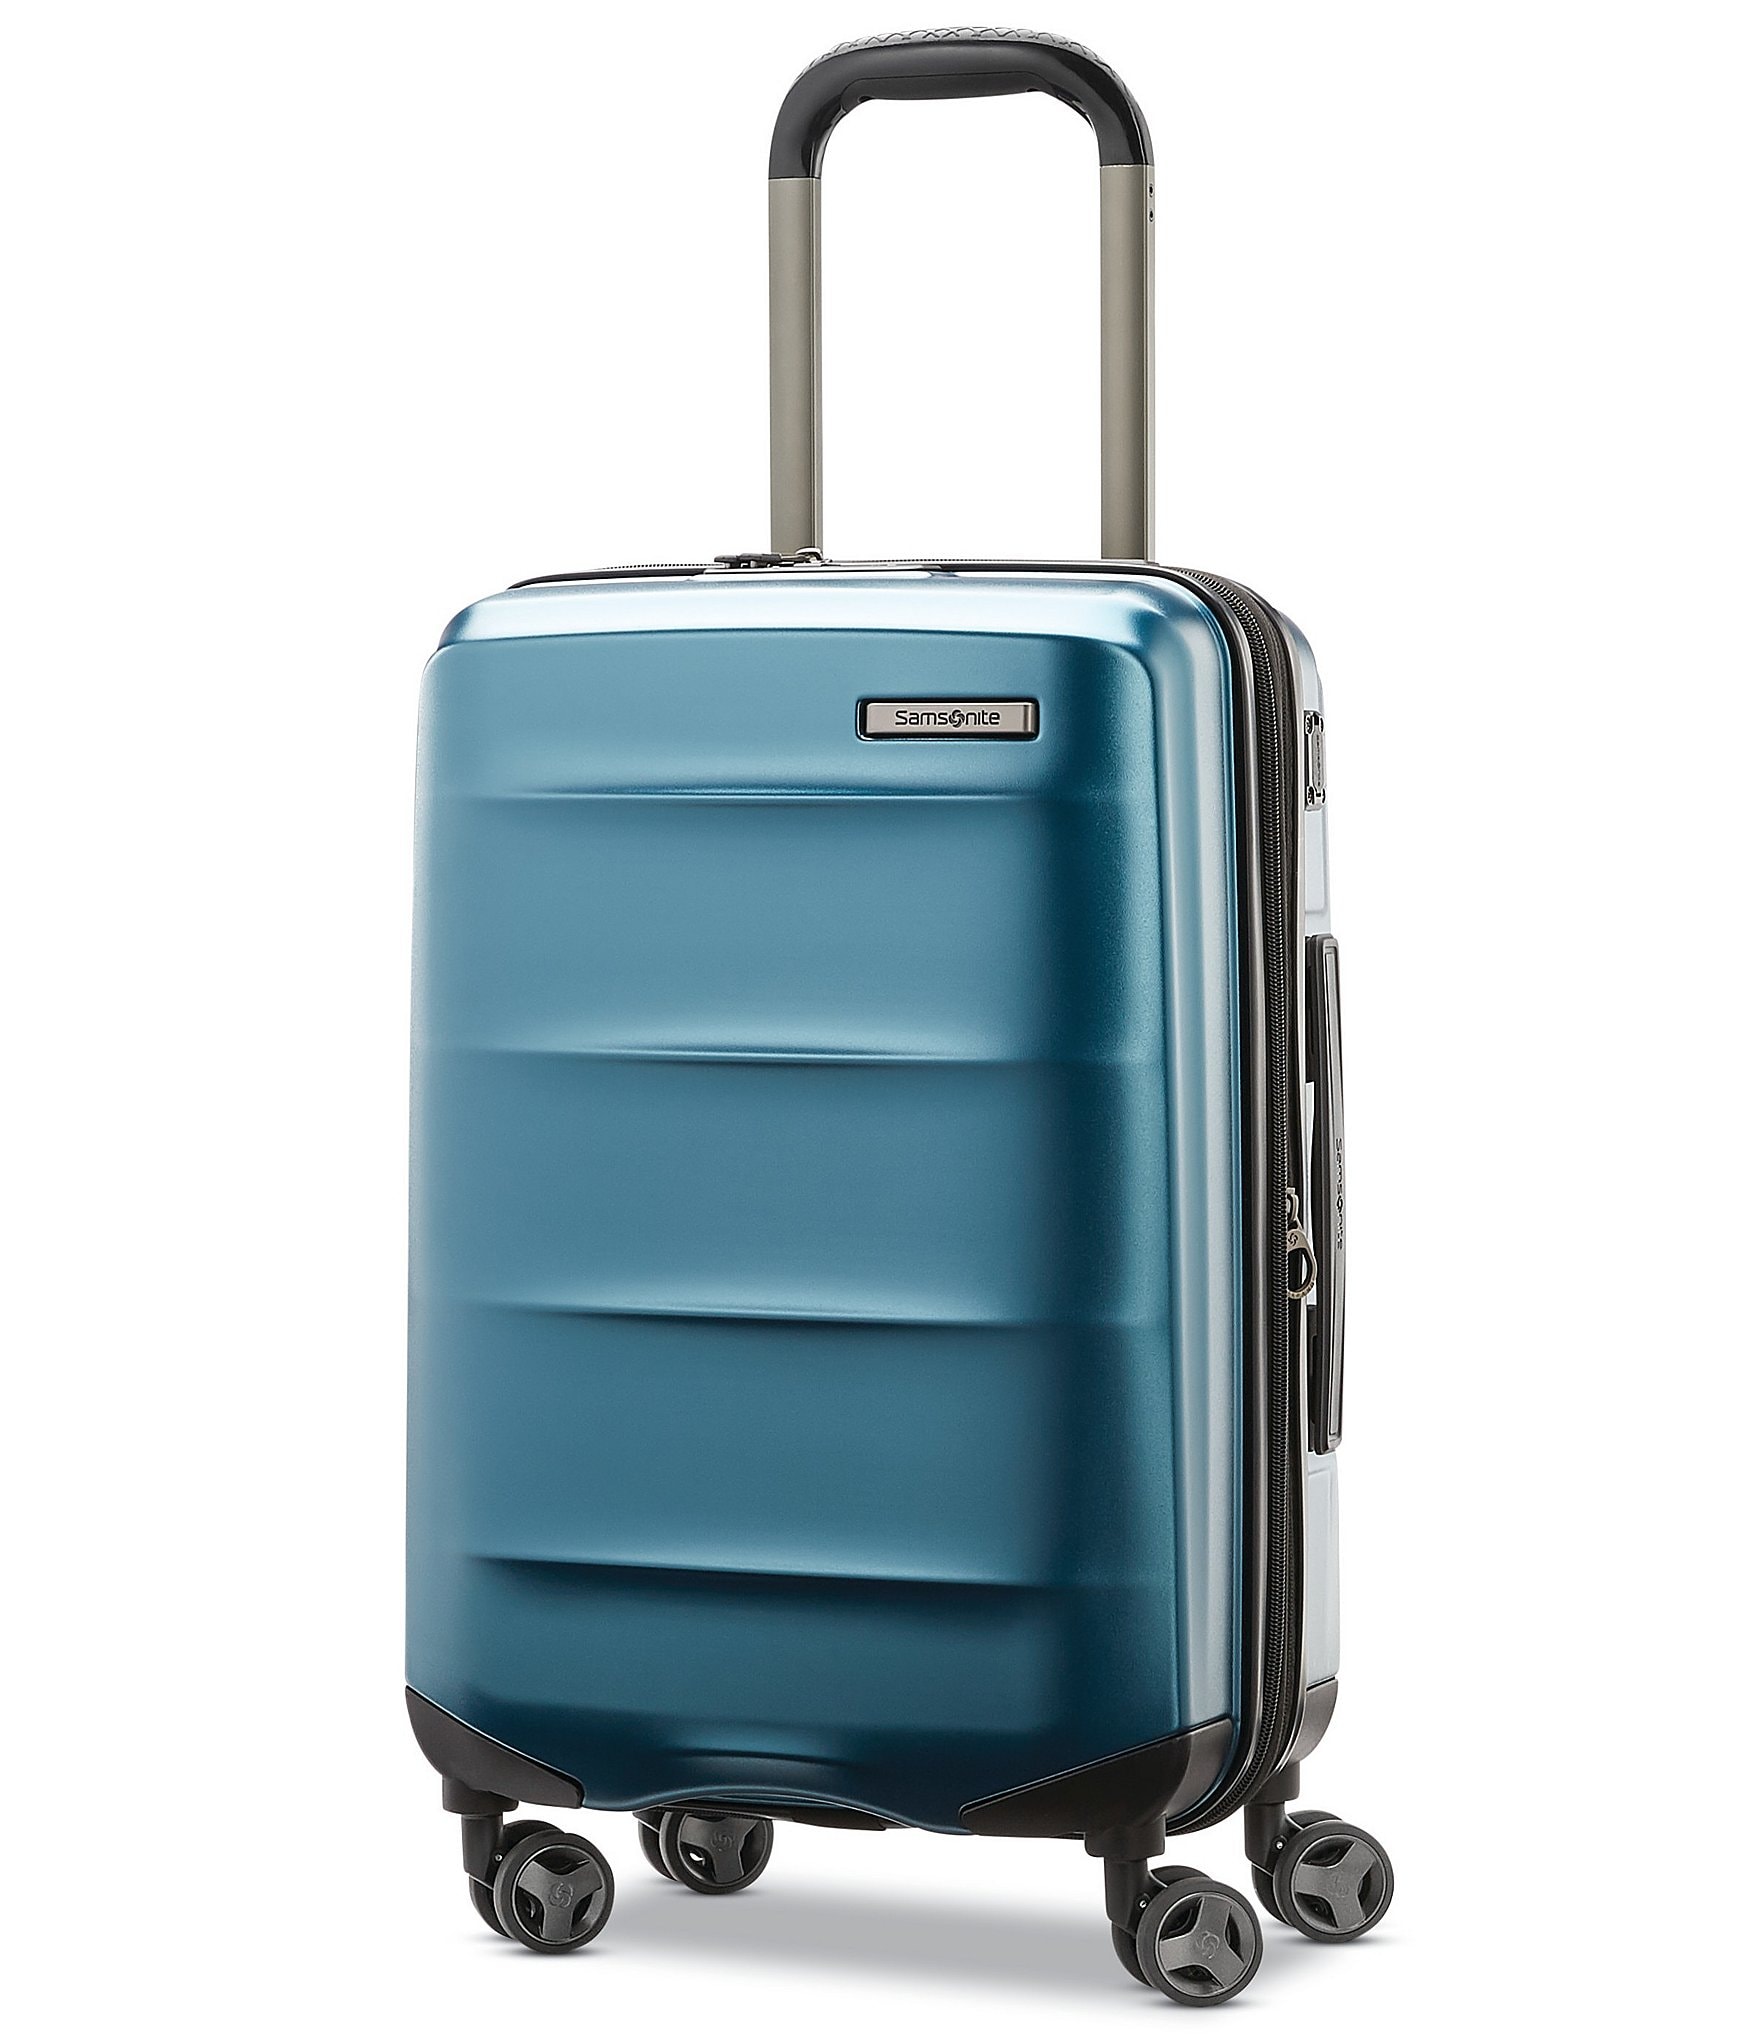 The Samsonite Omni is our affordable pick for keeping your carry